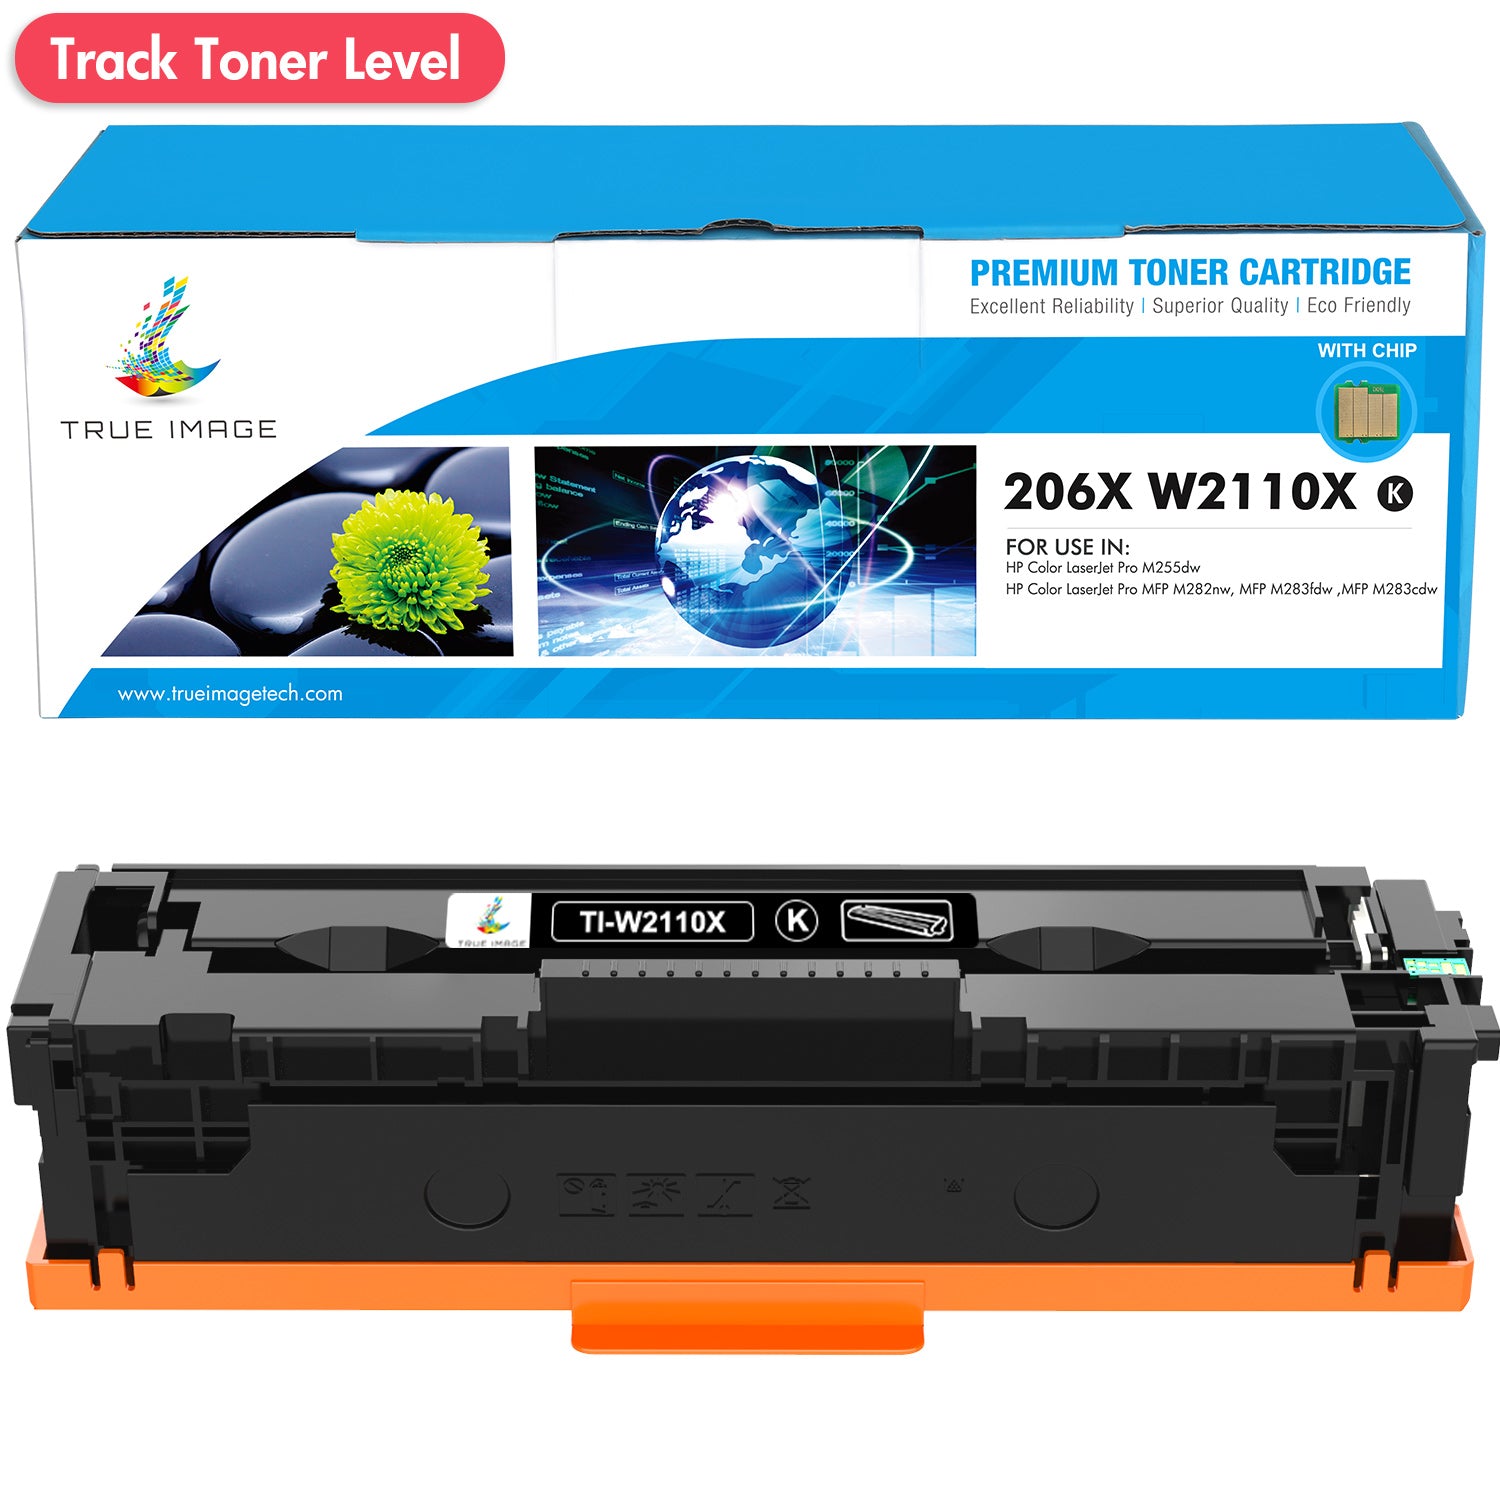 HP 206X W2110X Black Toner Replacement Cartridge - with Chip